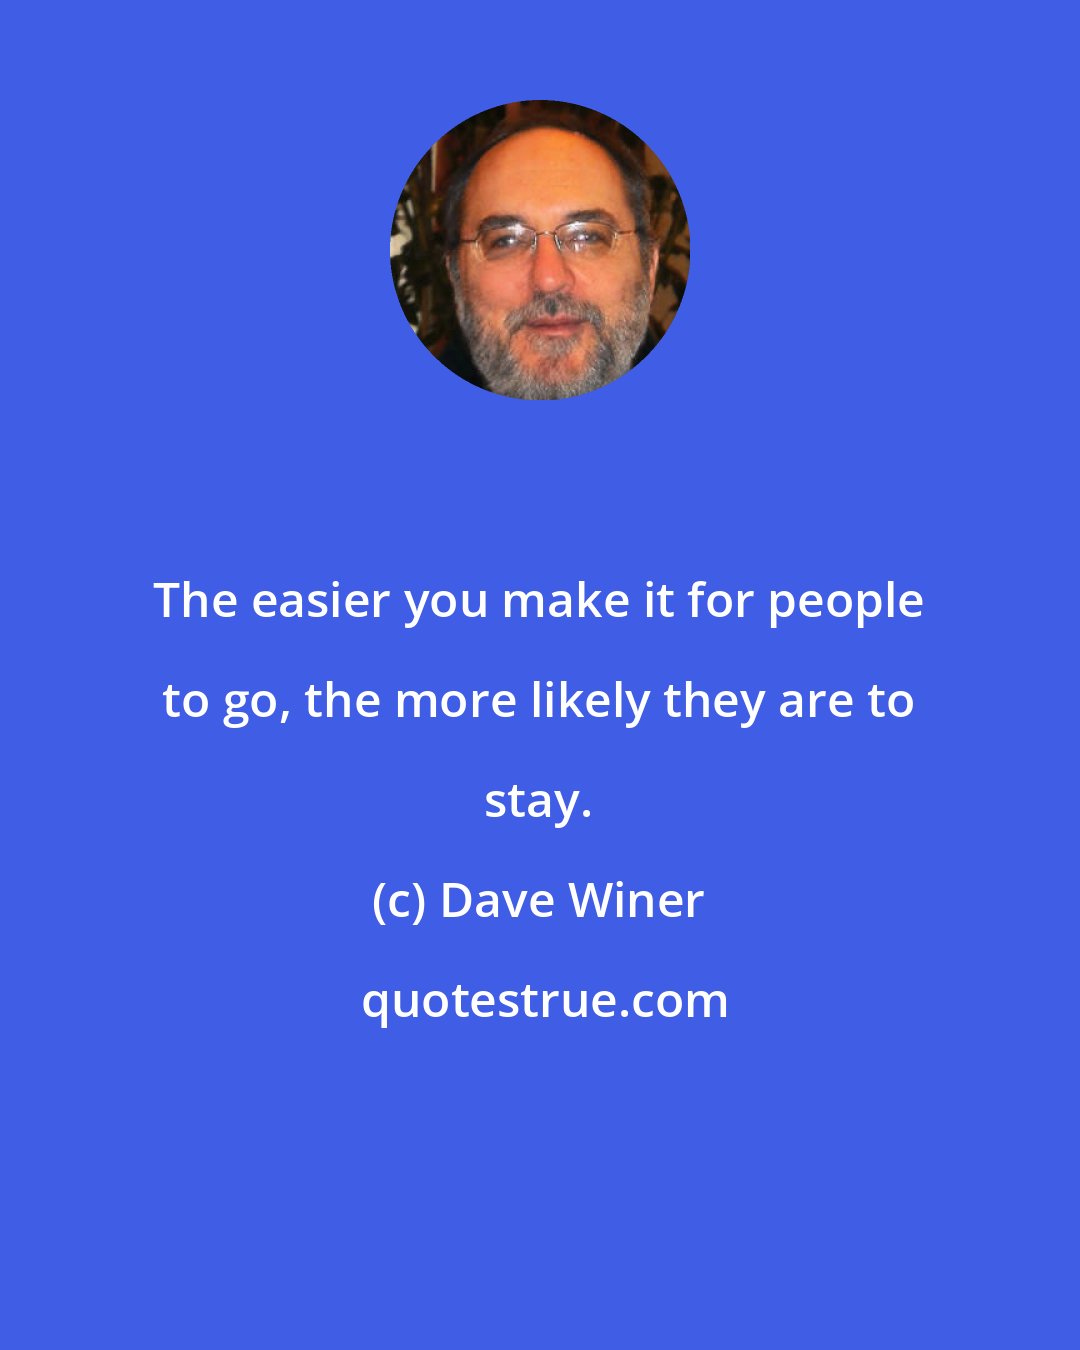 Dave Winer: The easier you make it for people to go, the more likely they are to stay.